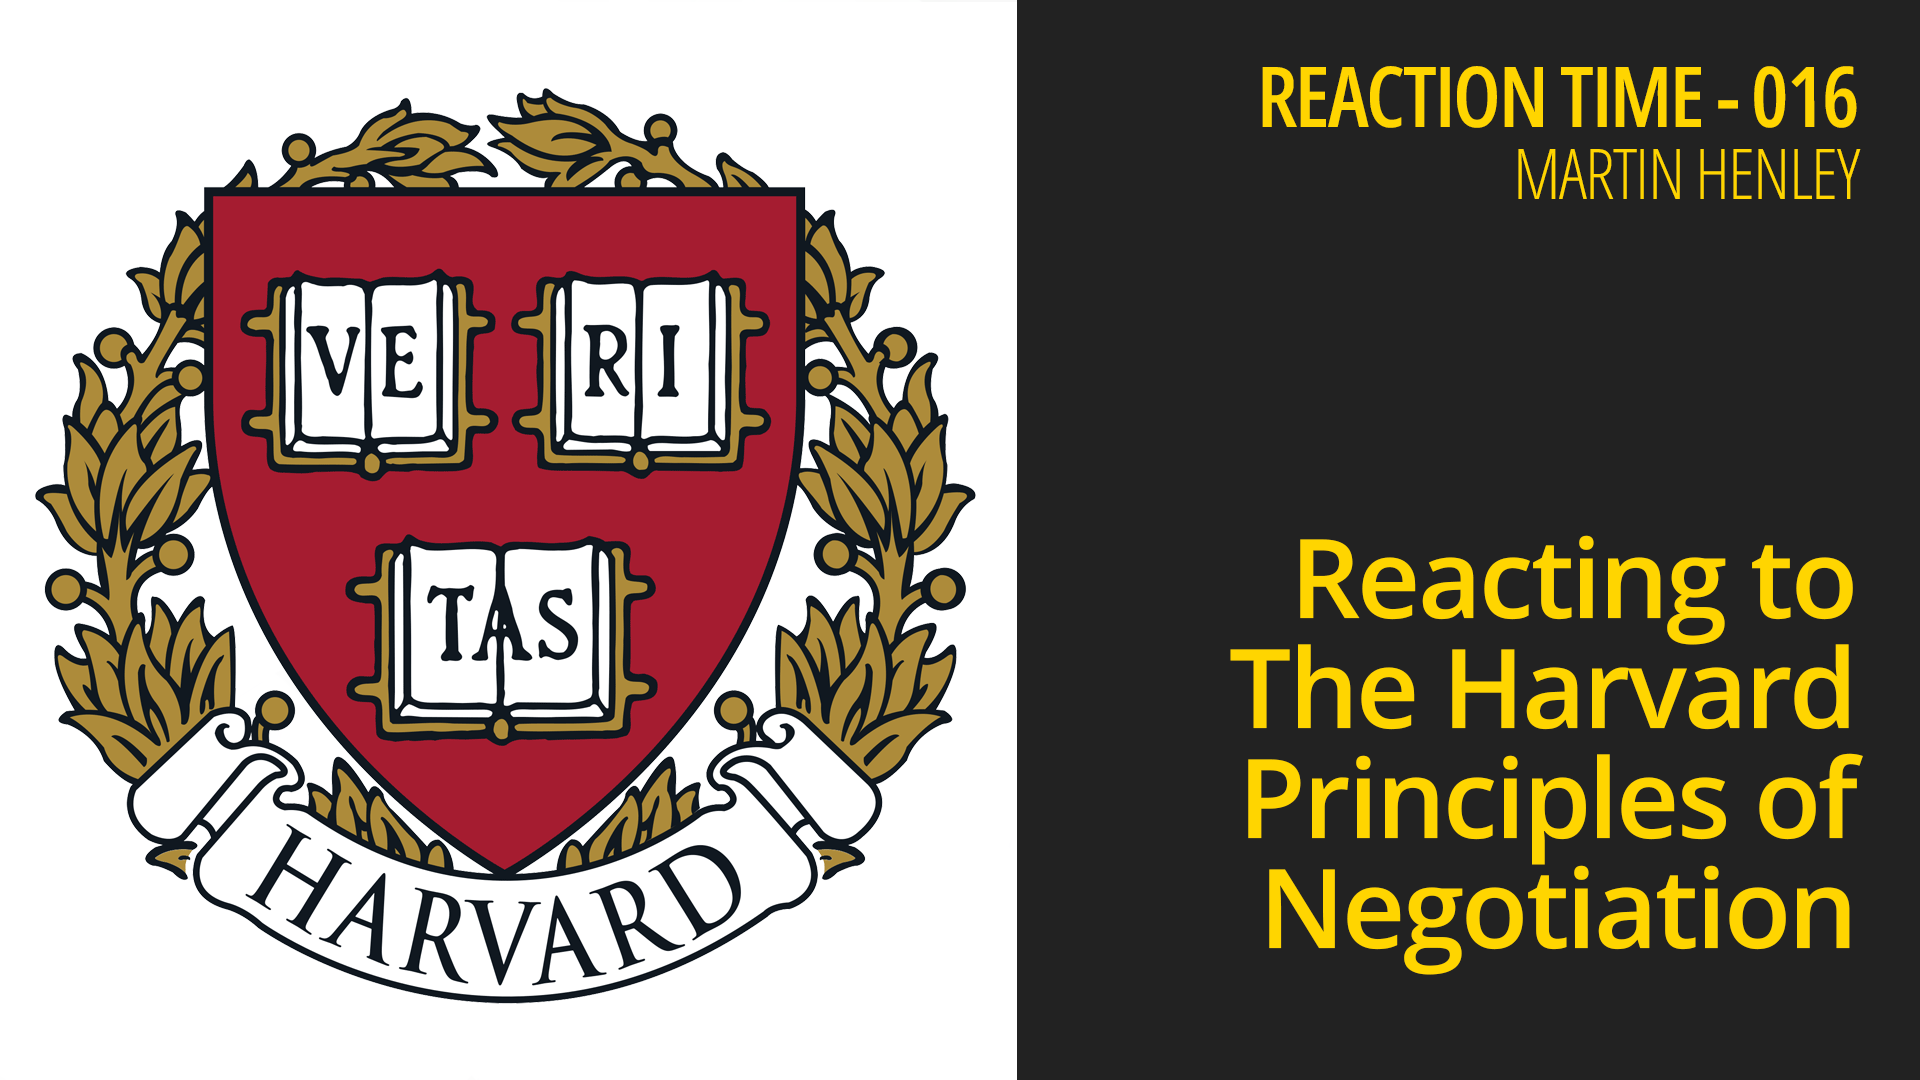 Reacting to The Harvard Principles of Negotiation – Reaction Time 16